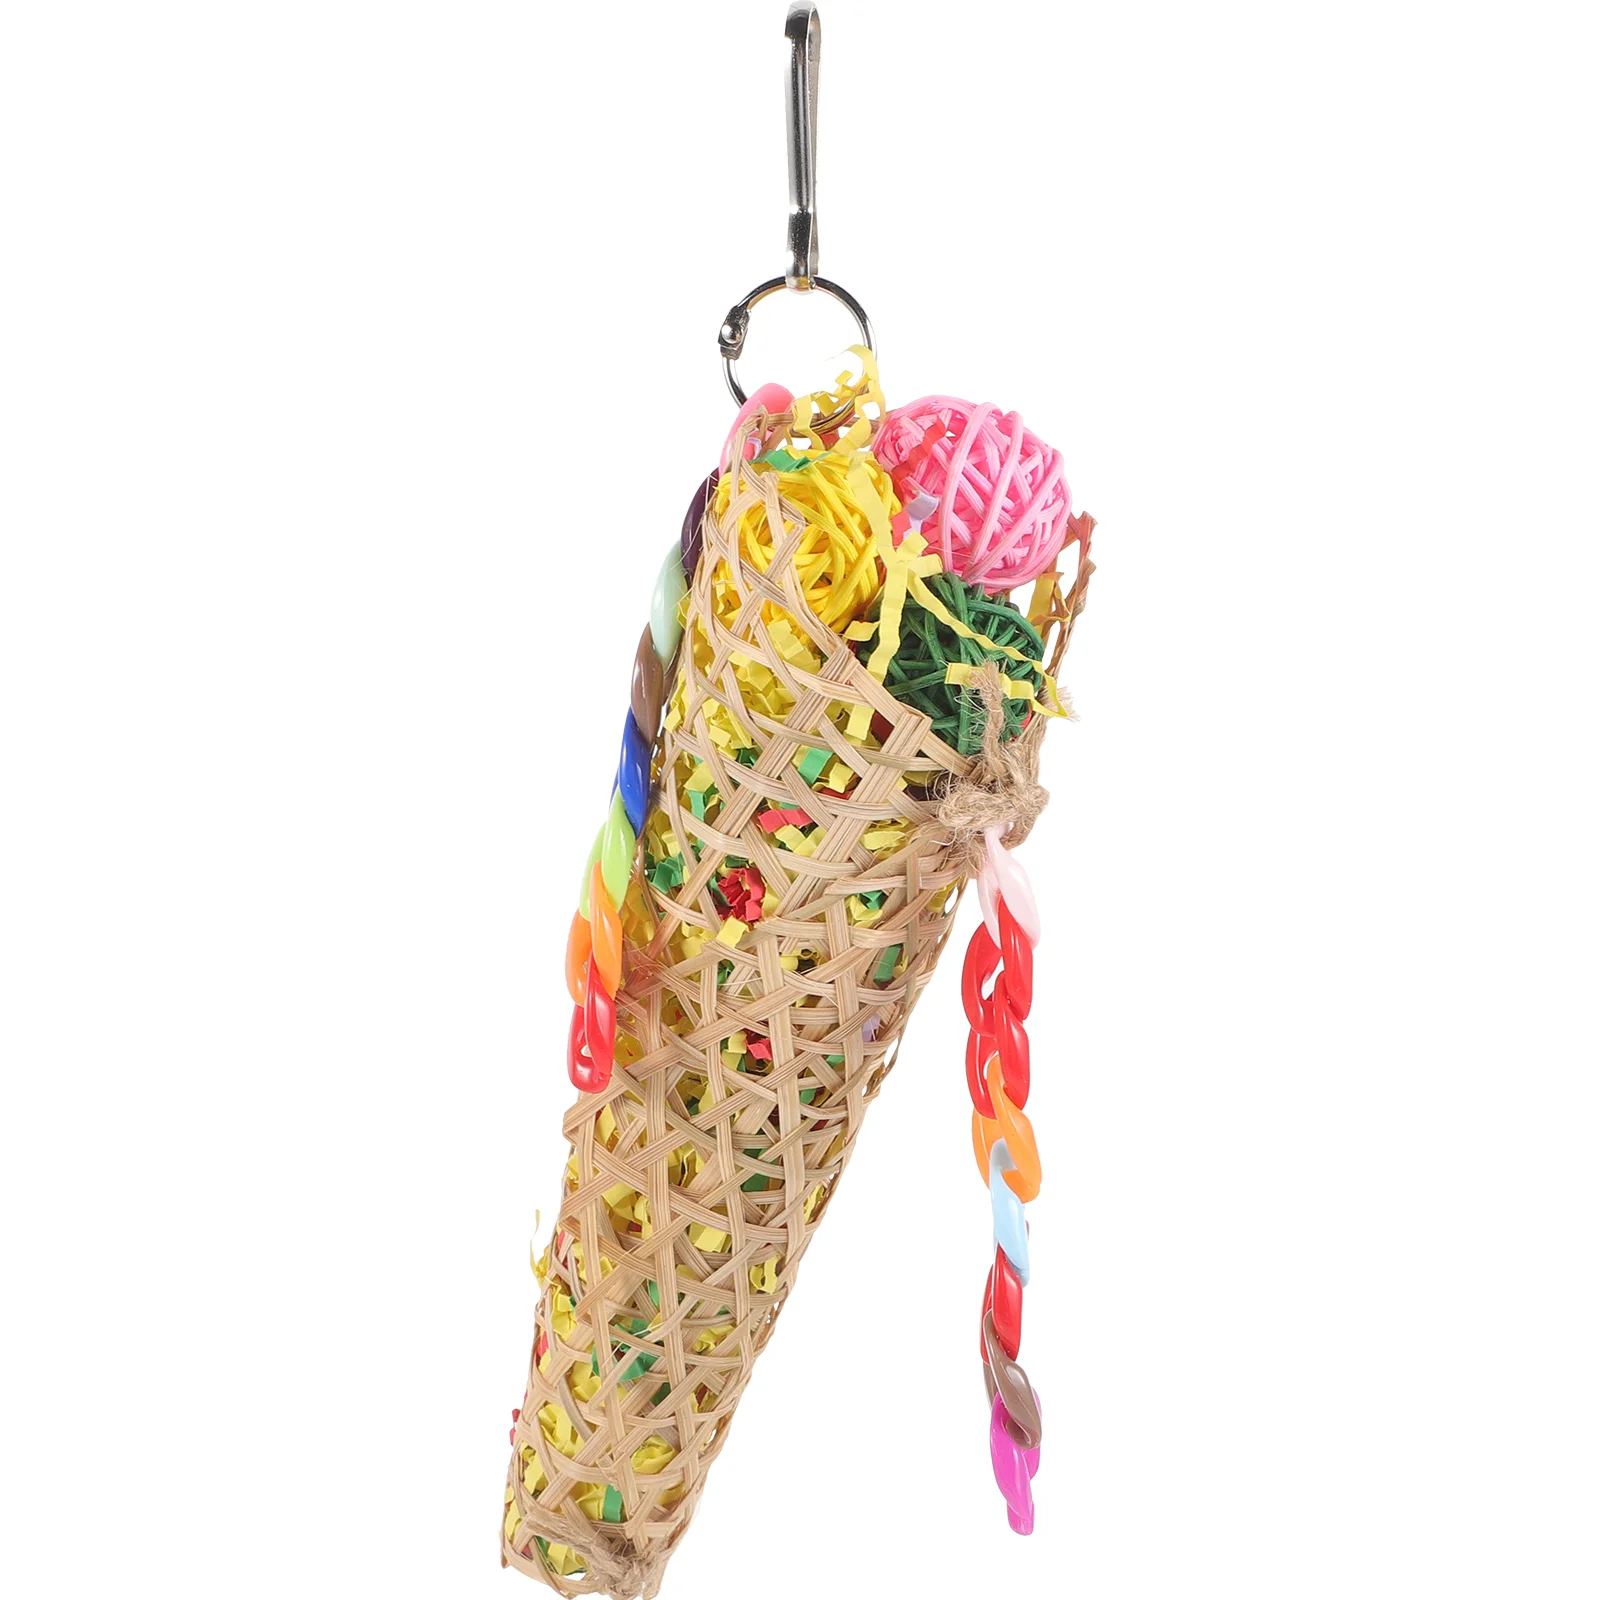 

Shredding Toy for Parrot Bird Chewing Toy Chewing Hanging Toy Bird Suspending Swing Toy